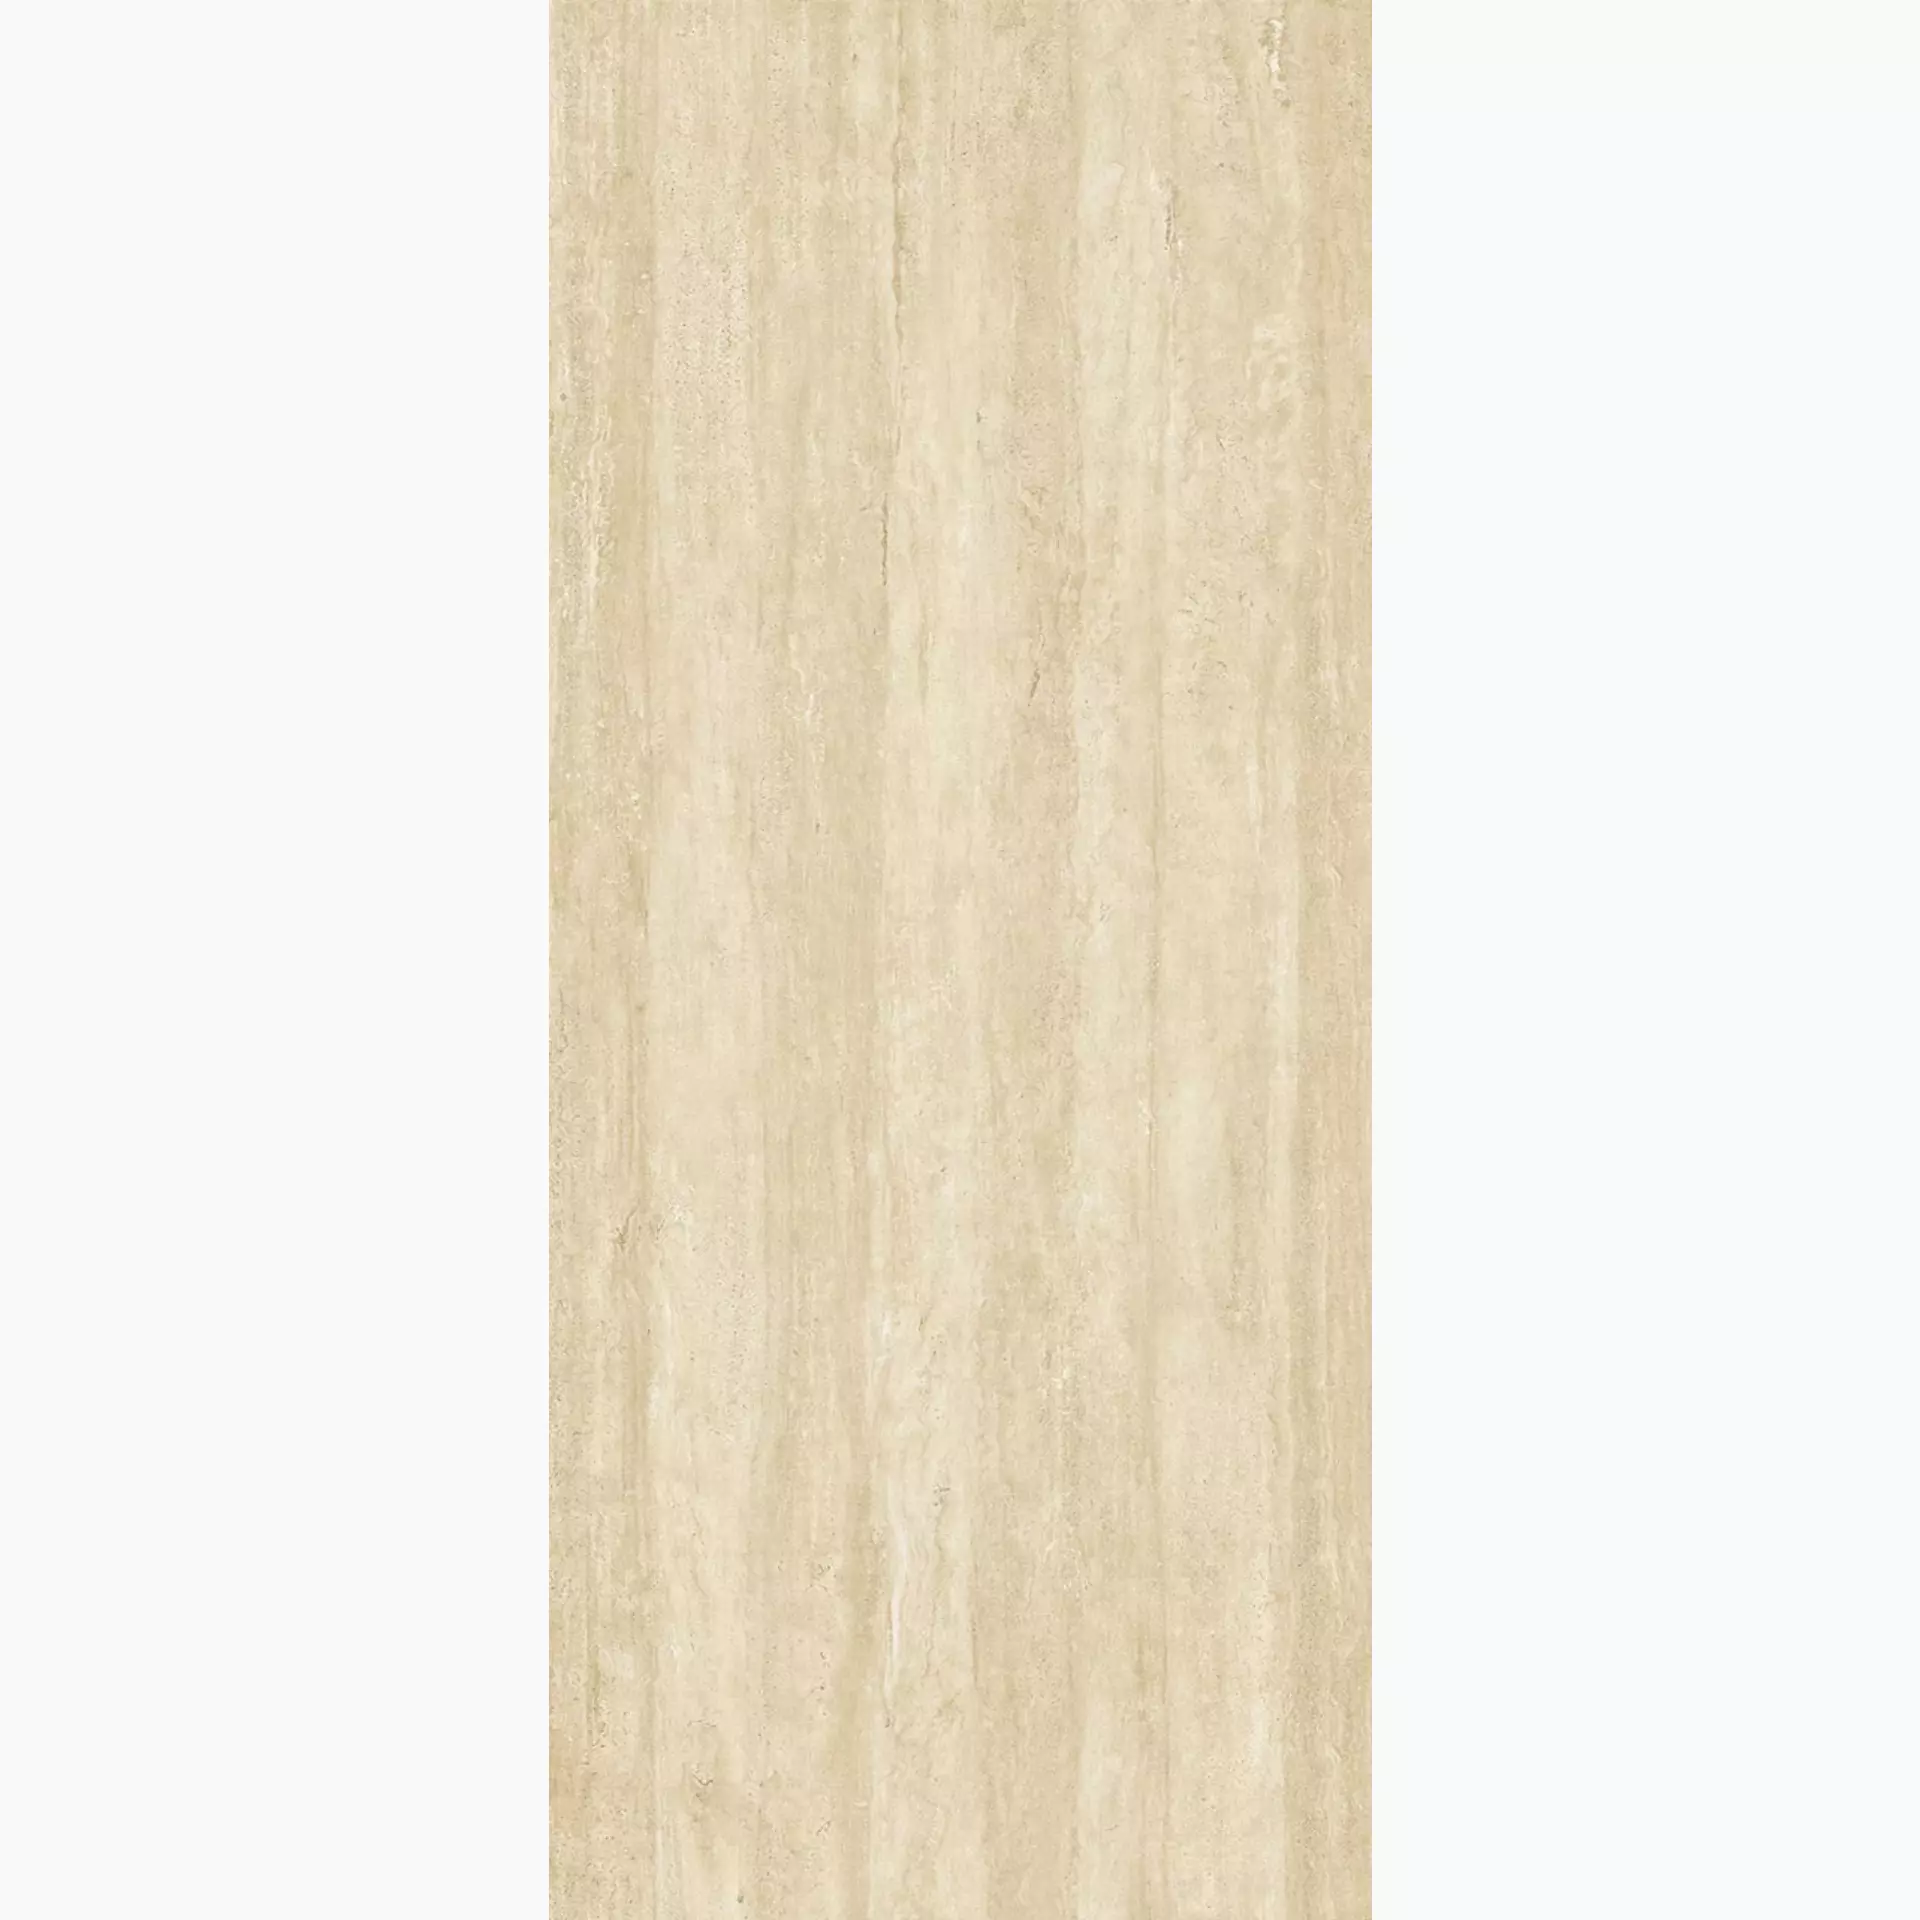 Coem Wide Gres Vein Gold Naturale Decor Touch 0TV282R 120x280cm rectified 6mm